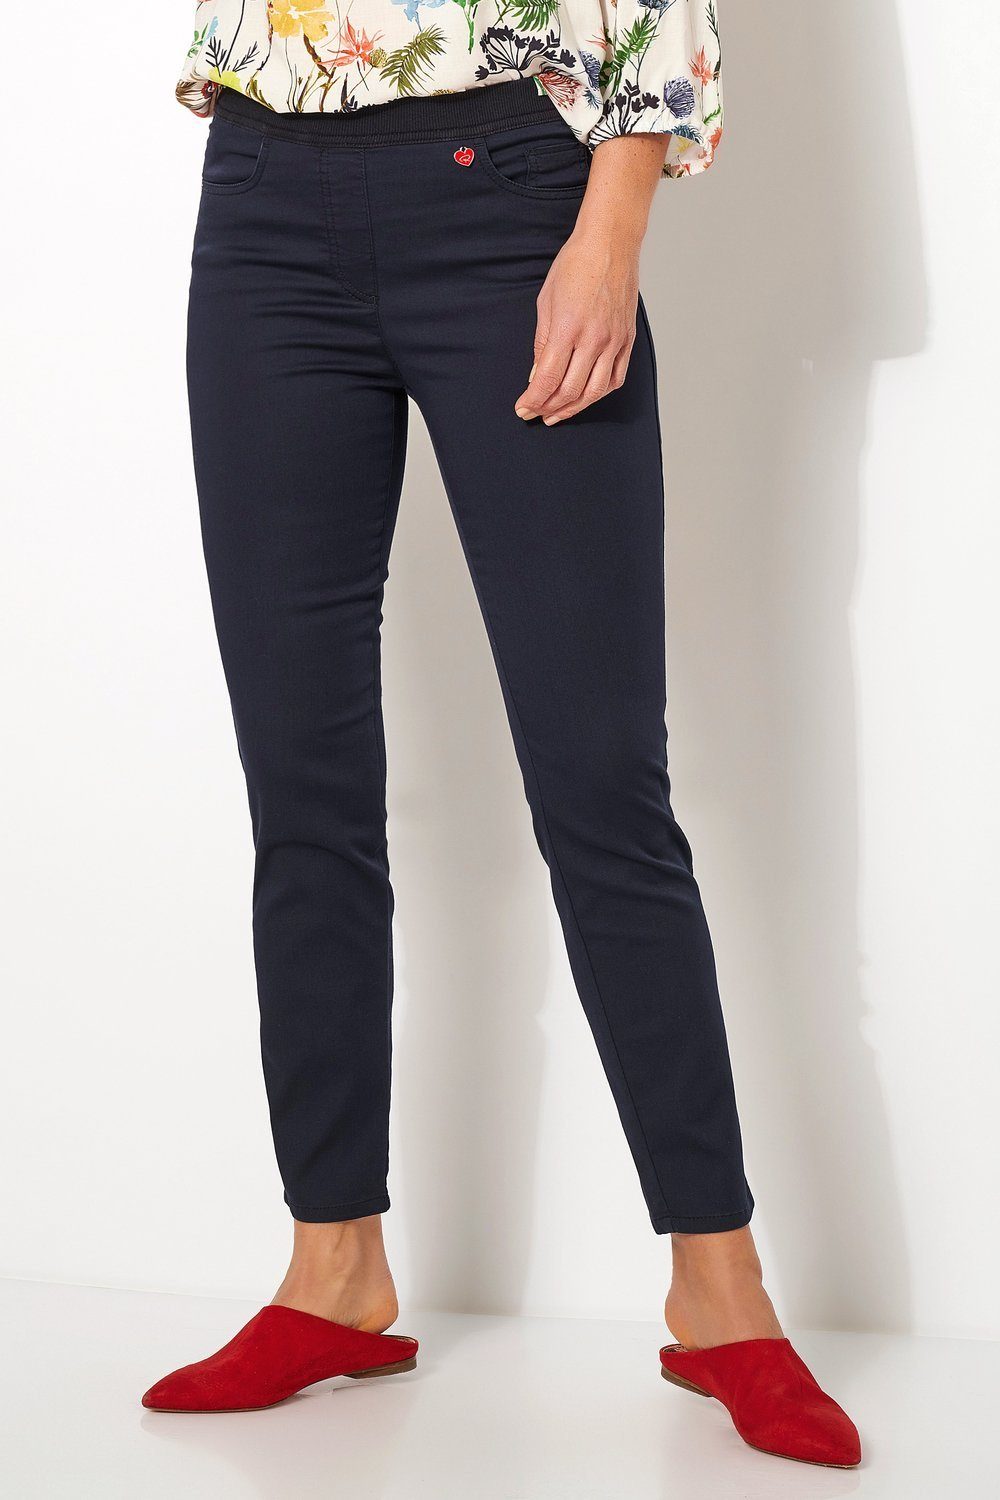 Relaxed by TONI Jeans marine 7/8 Slim-fit-Jeans